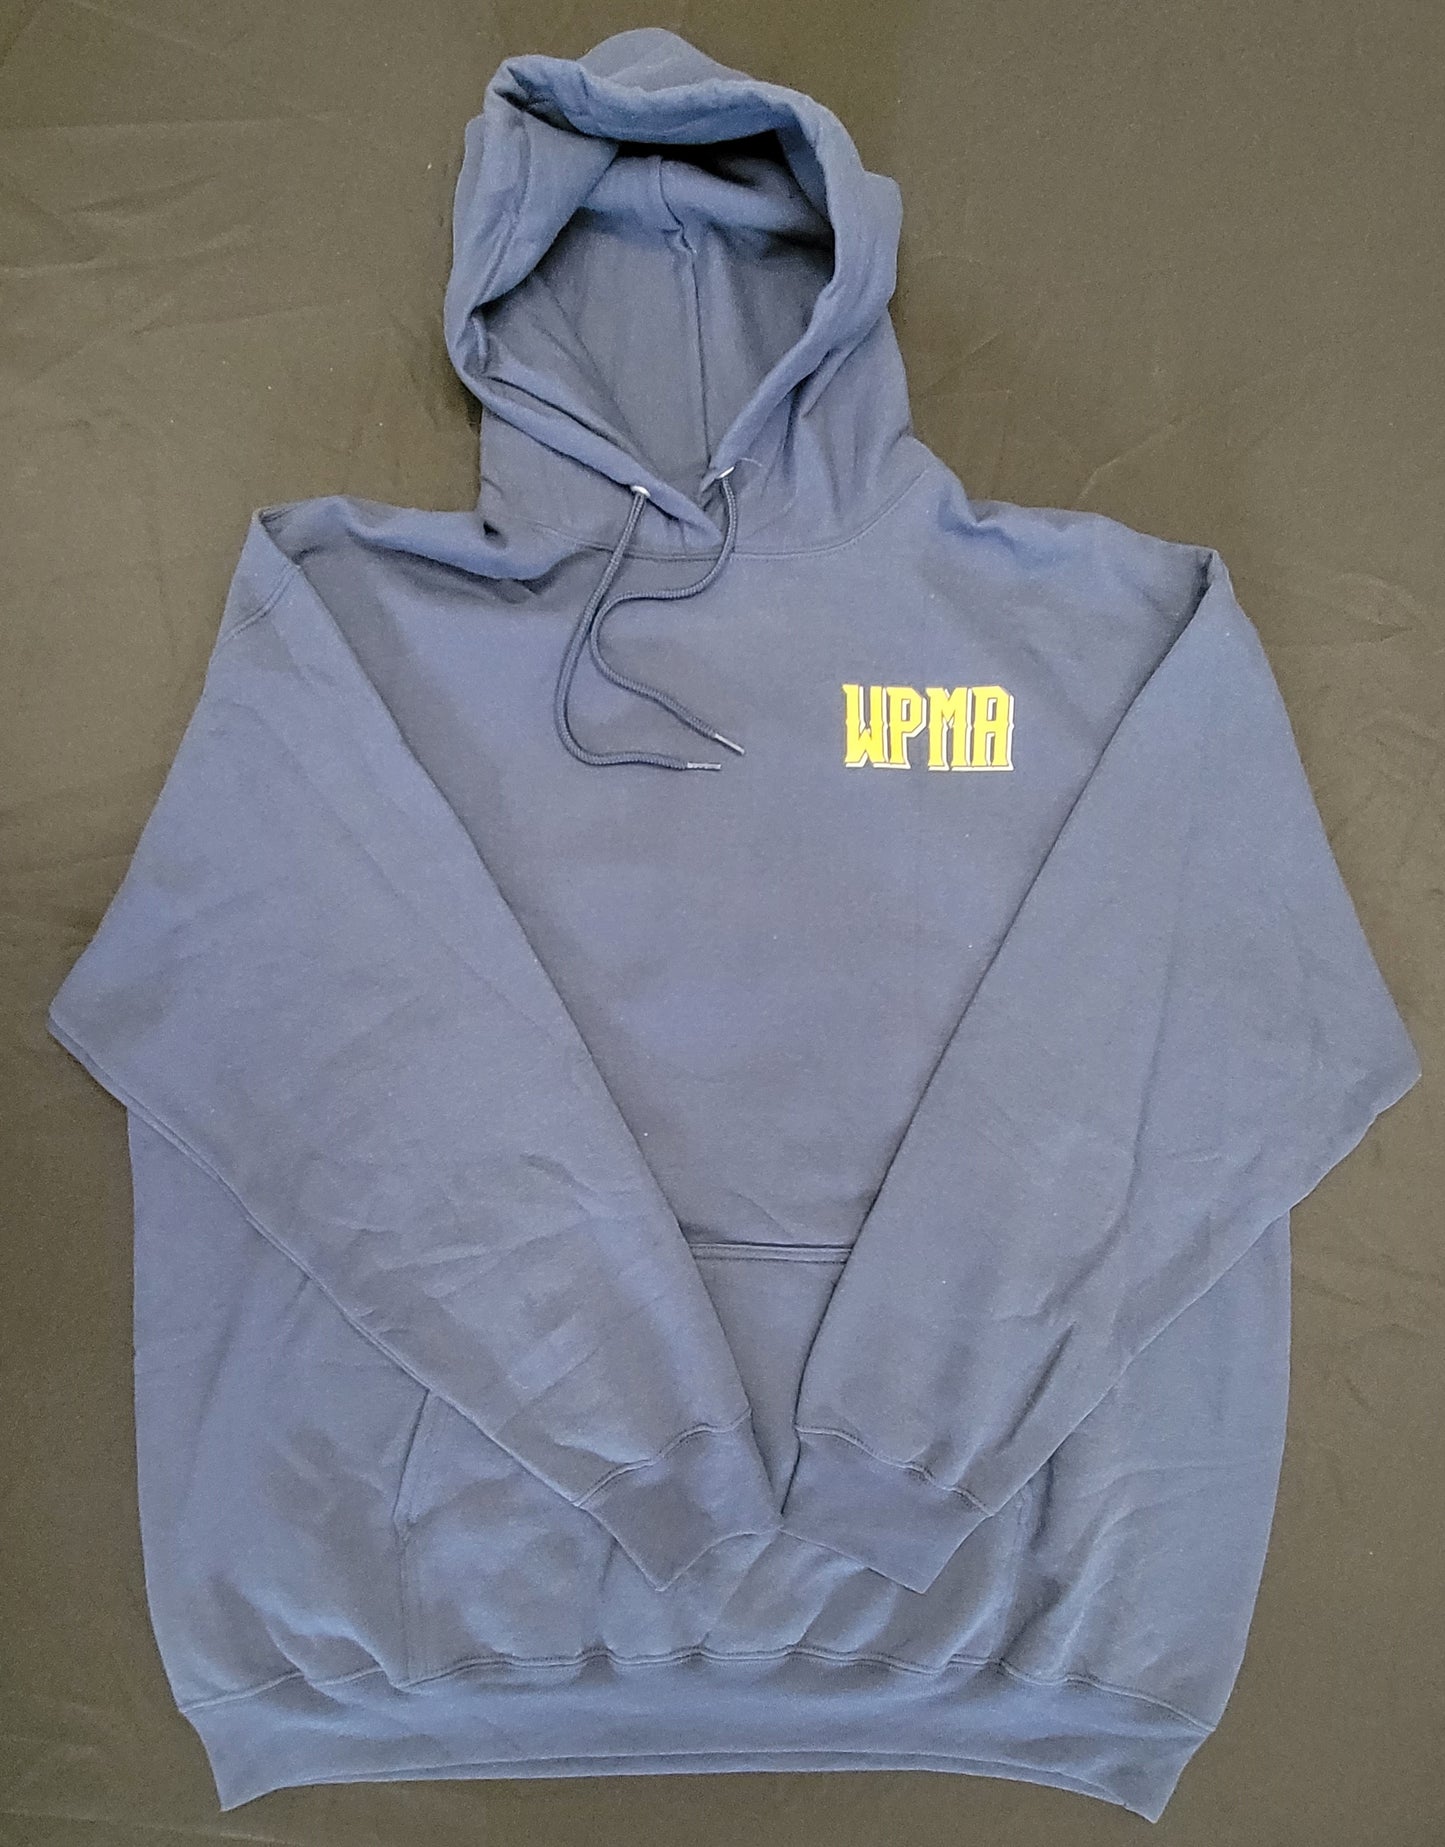 Hoodie Style 2 - Pull over w/ Front and Back logo